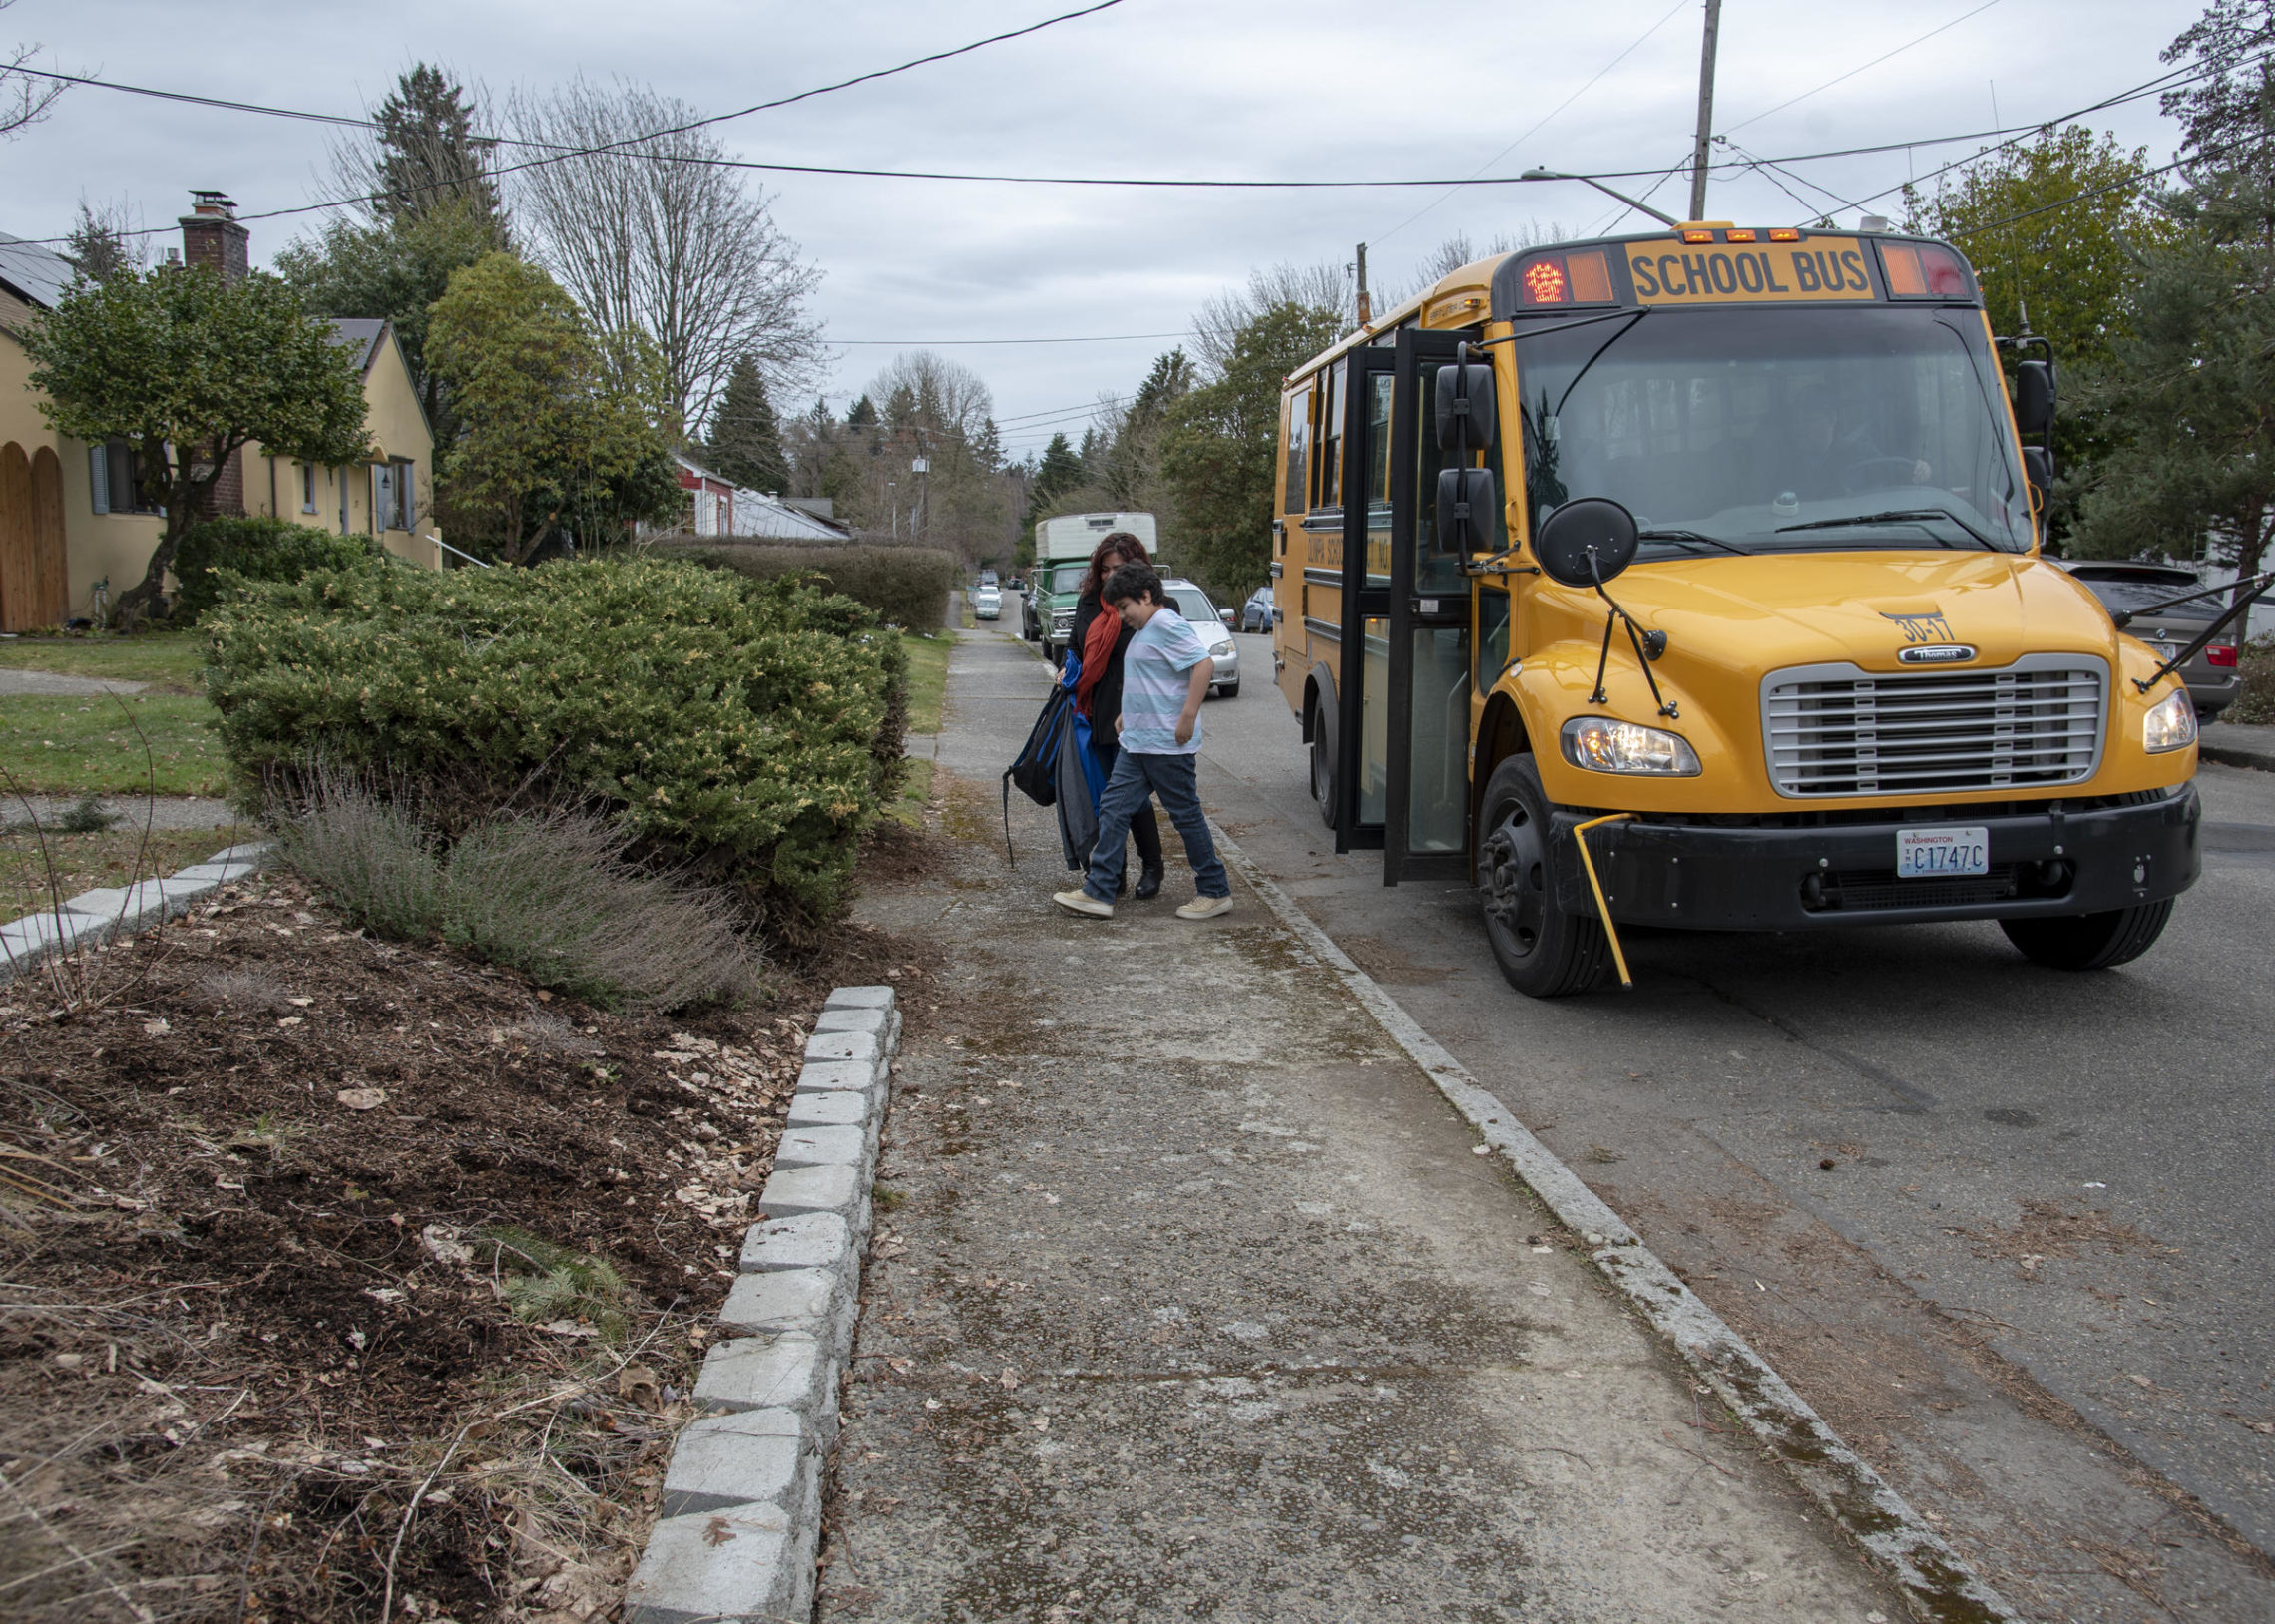 Landa greets Zach outside their home in Olympia as he arrives from school on Wednesday, Feb. 27, 2019. Landa is unable to go to Zach's school because of her felony record, so she must be able to meet him at home when he is finished with school. CREDIT: SHAUNA SOWERSBY / THE TACOMA NEWS TRIBUNE